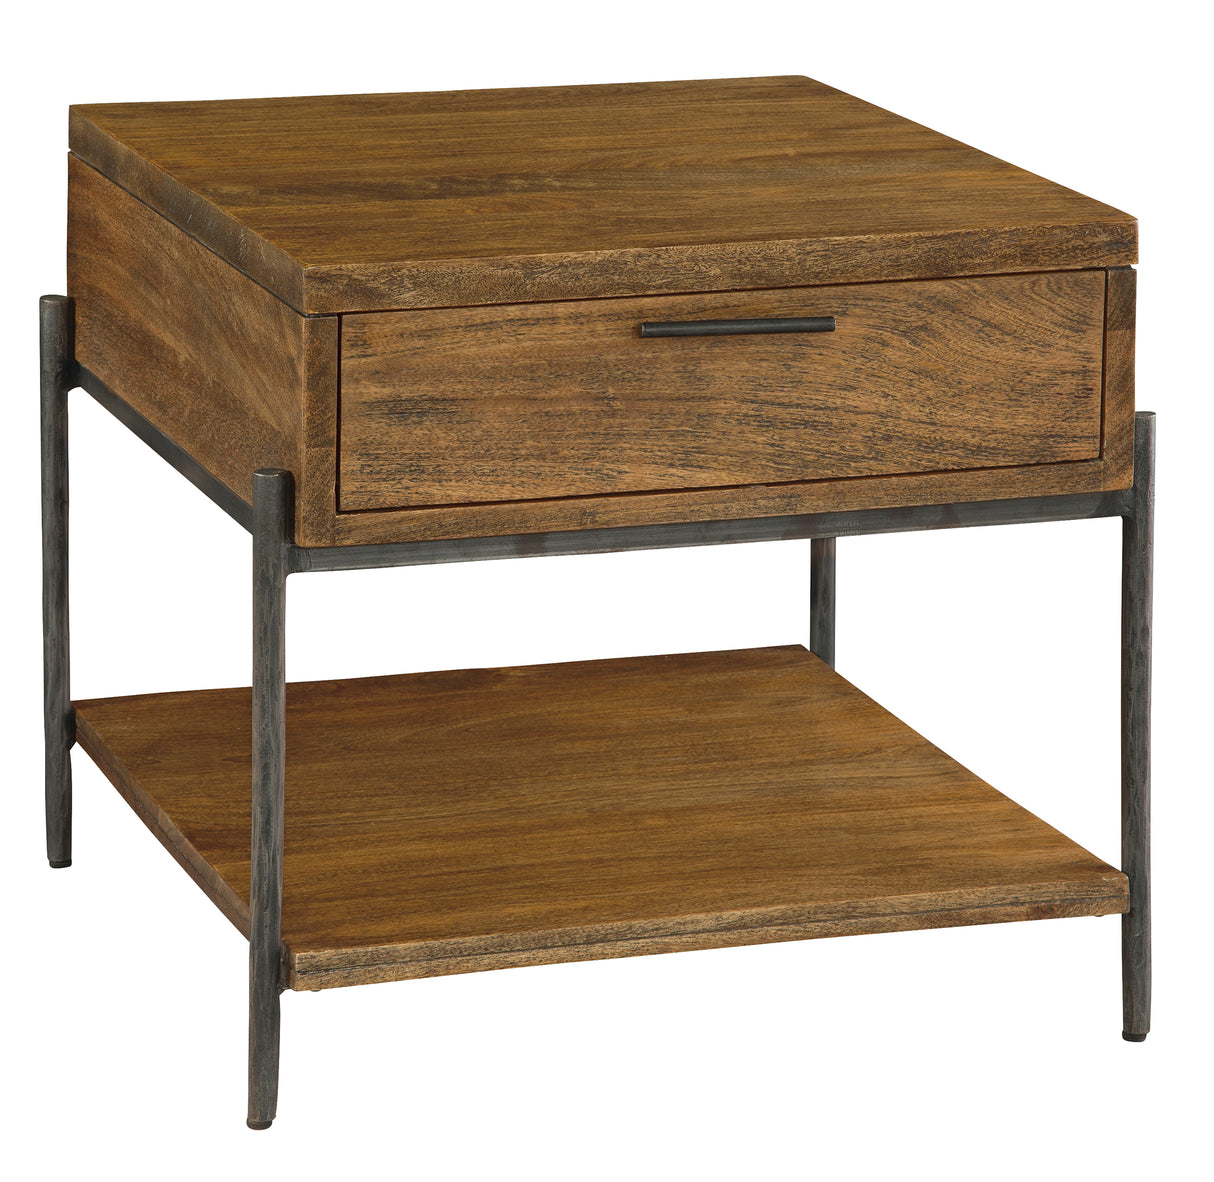 Hekman 23703 Bedford Park 26in. x 28in. x 26.5in. End Table